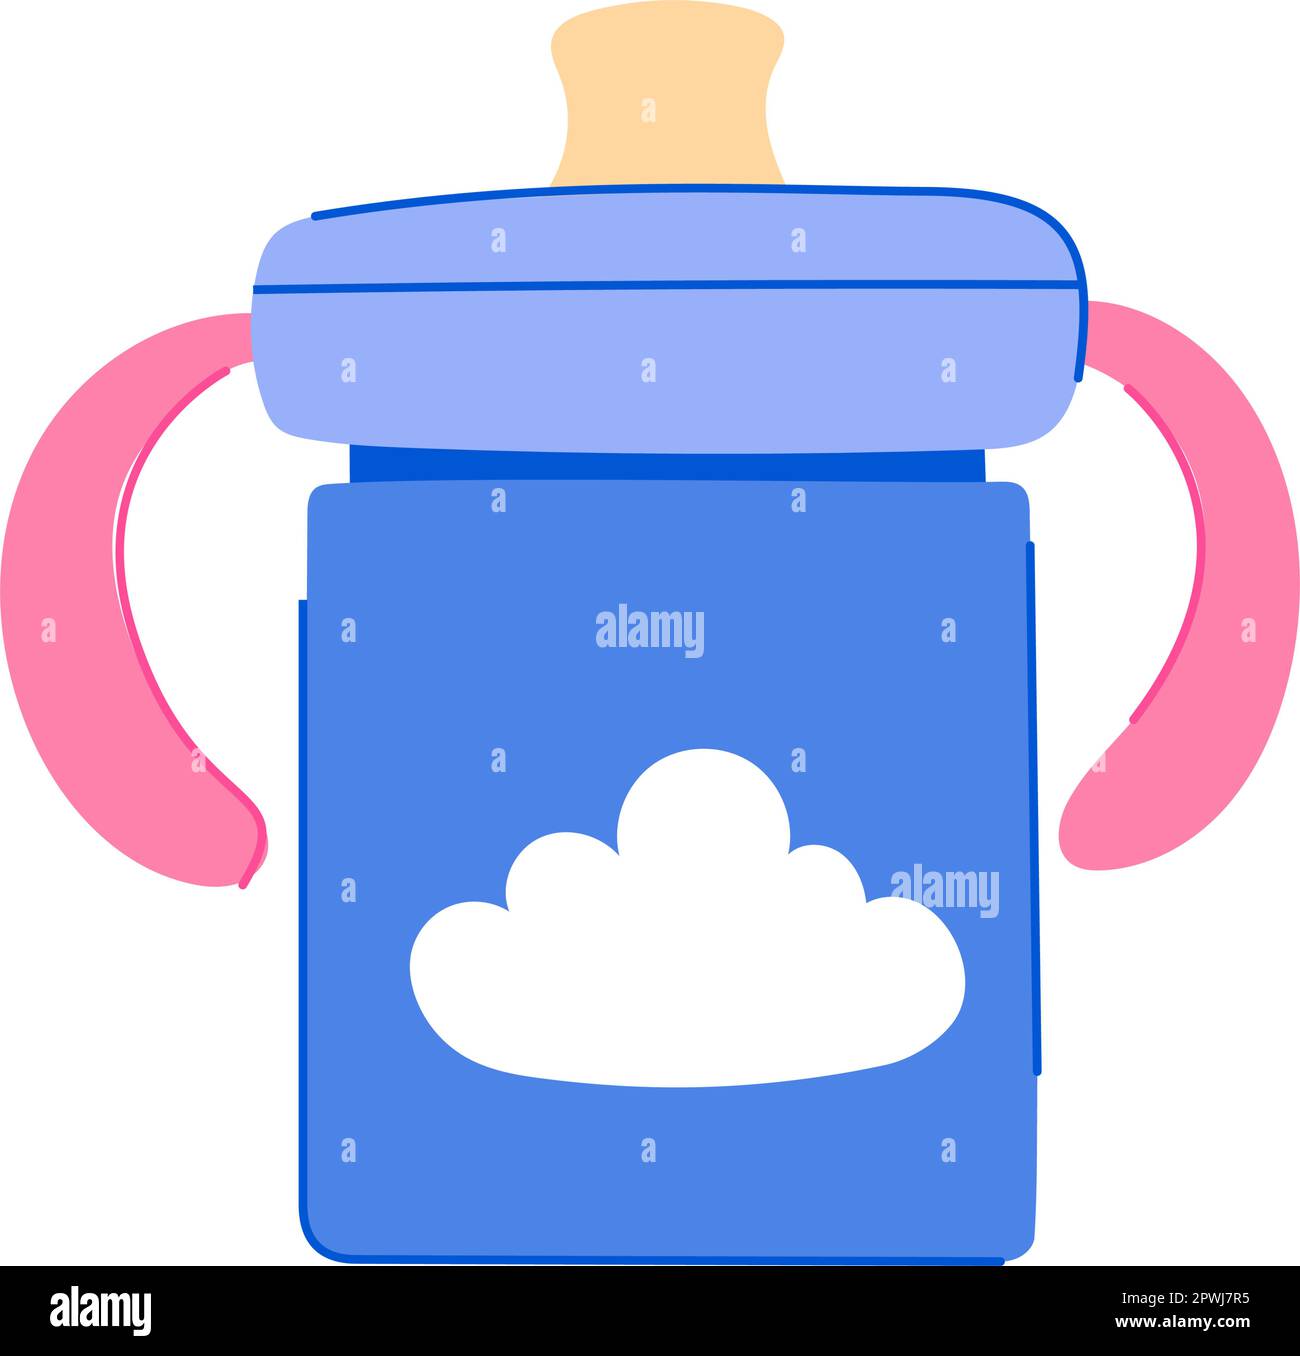 https://c8.alamy.com/comp/2PWJ7R5/water-sippy-cup-cartoon-child-feeding-straw-training-water-sippy-cup-sign-isolated-symbol-vector-illustration-2PWJ7R5.jpg